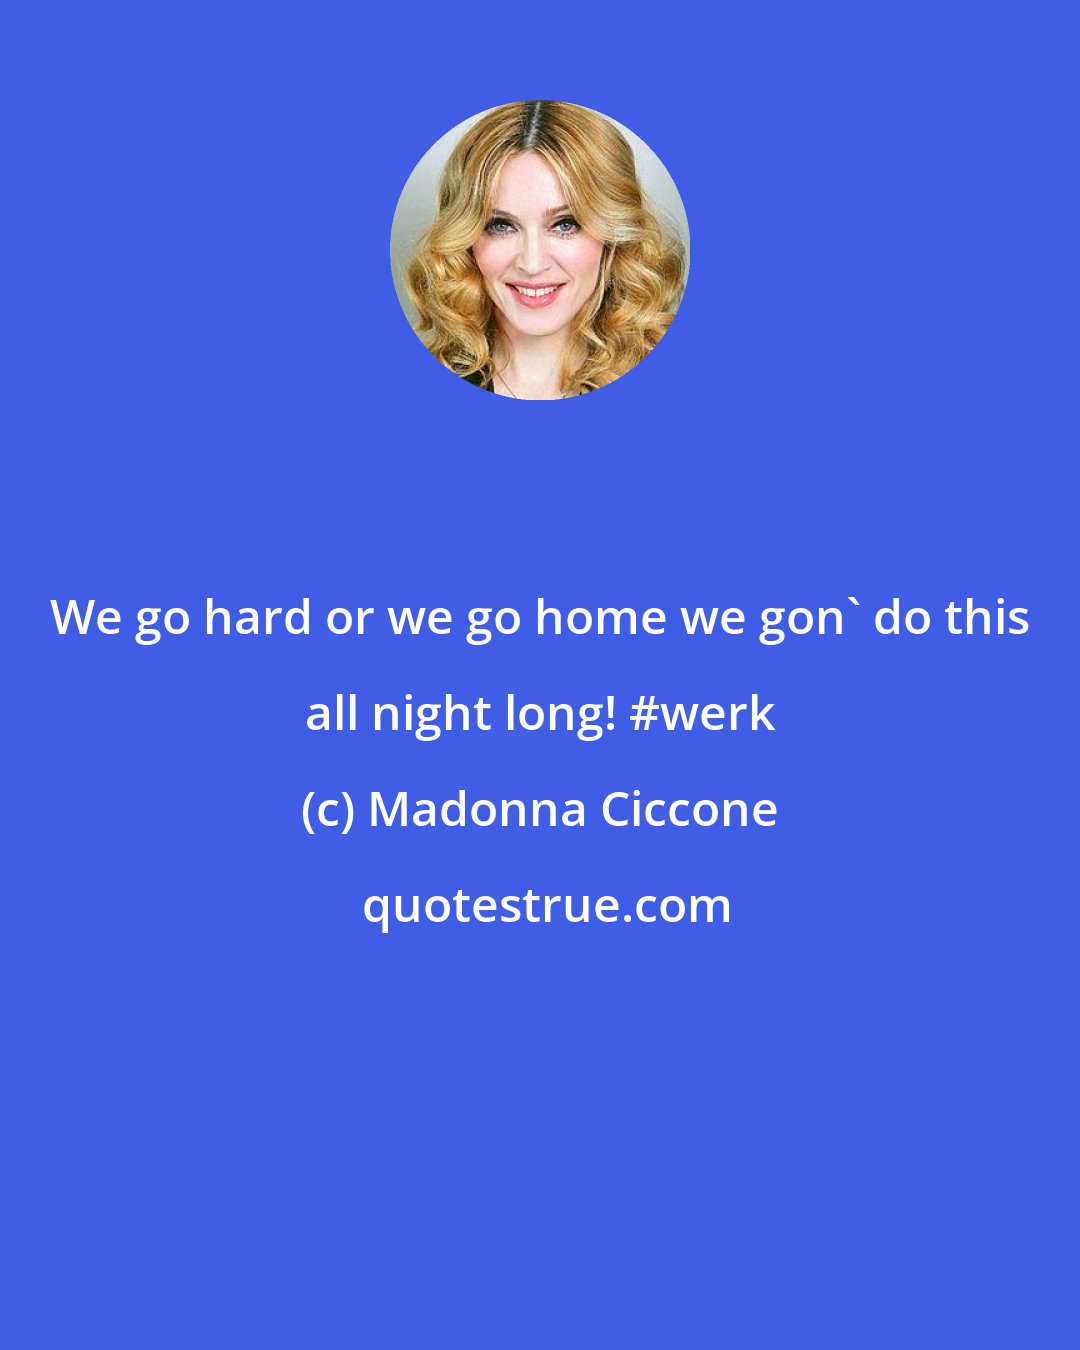 Madonna Ciccone: We go hard or we go home we gon' do this all night long! #werk